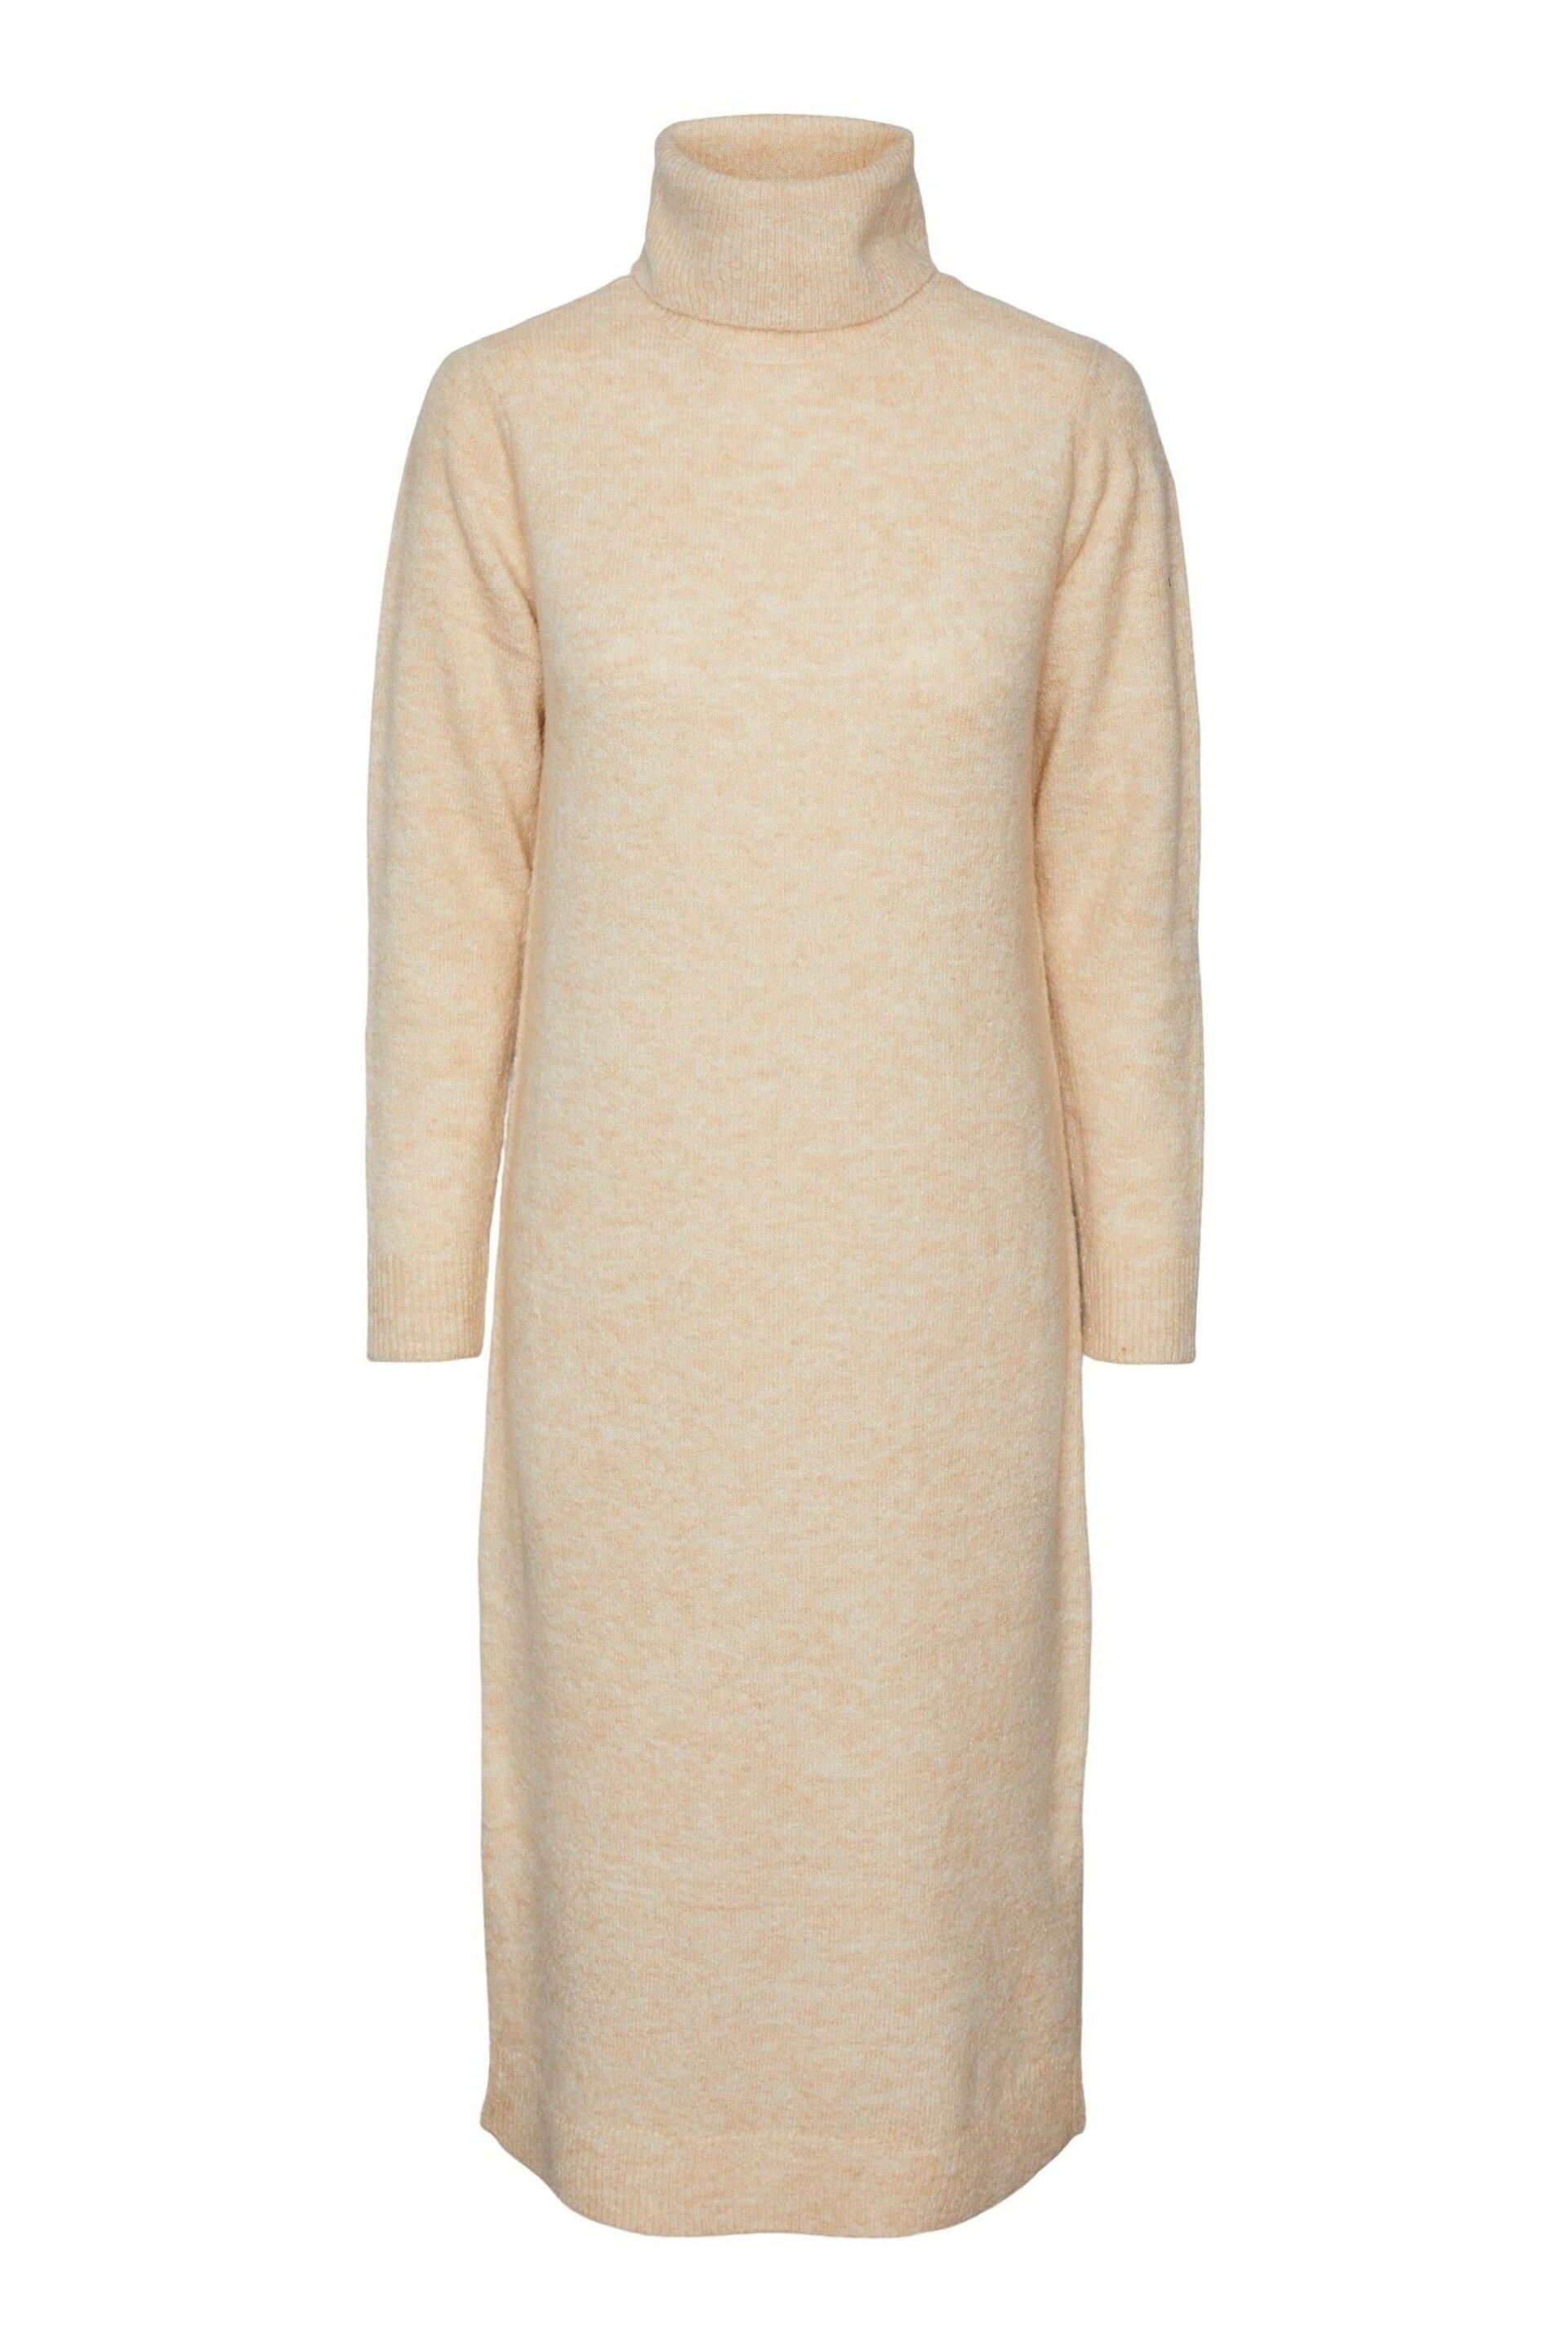 PIECES Cream Roll Neck Knitted Midi Jumper Dress - Image 5 of 5